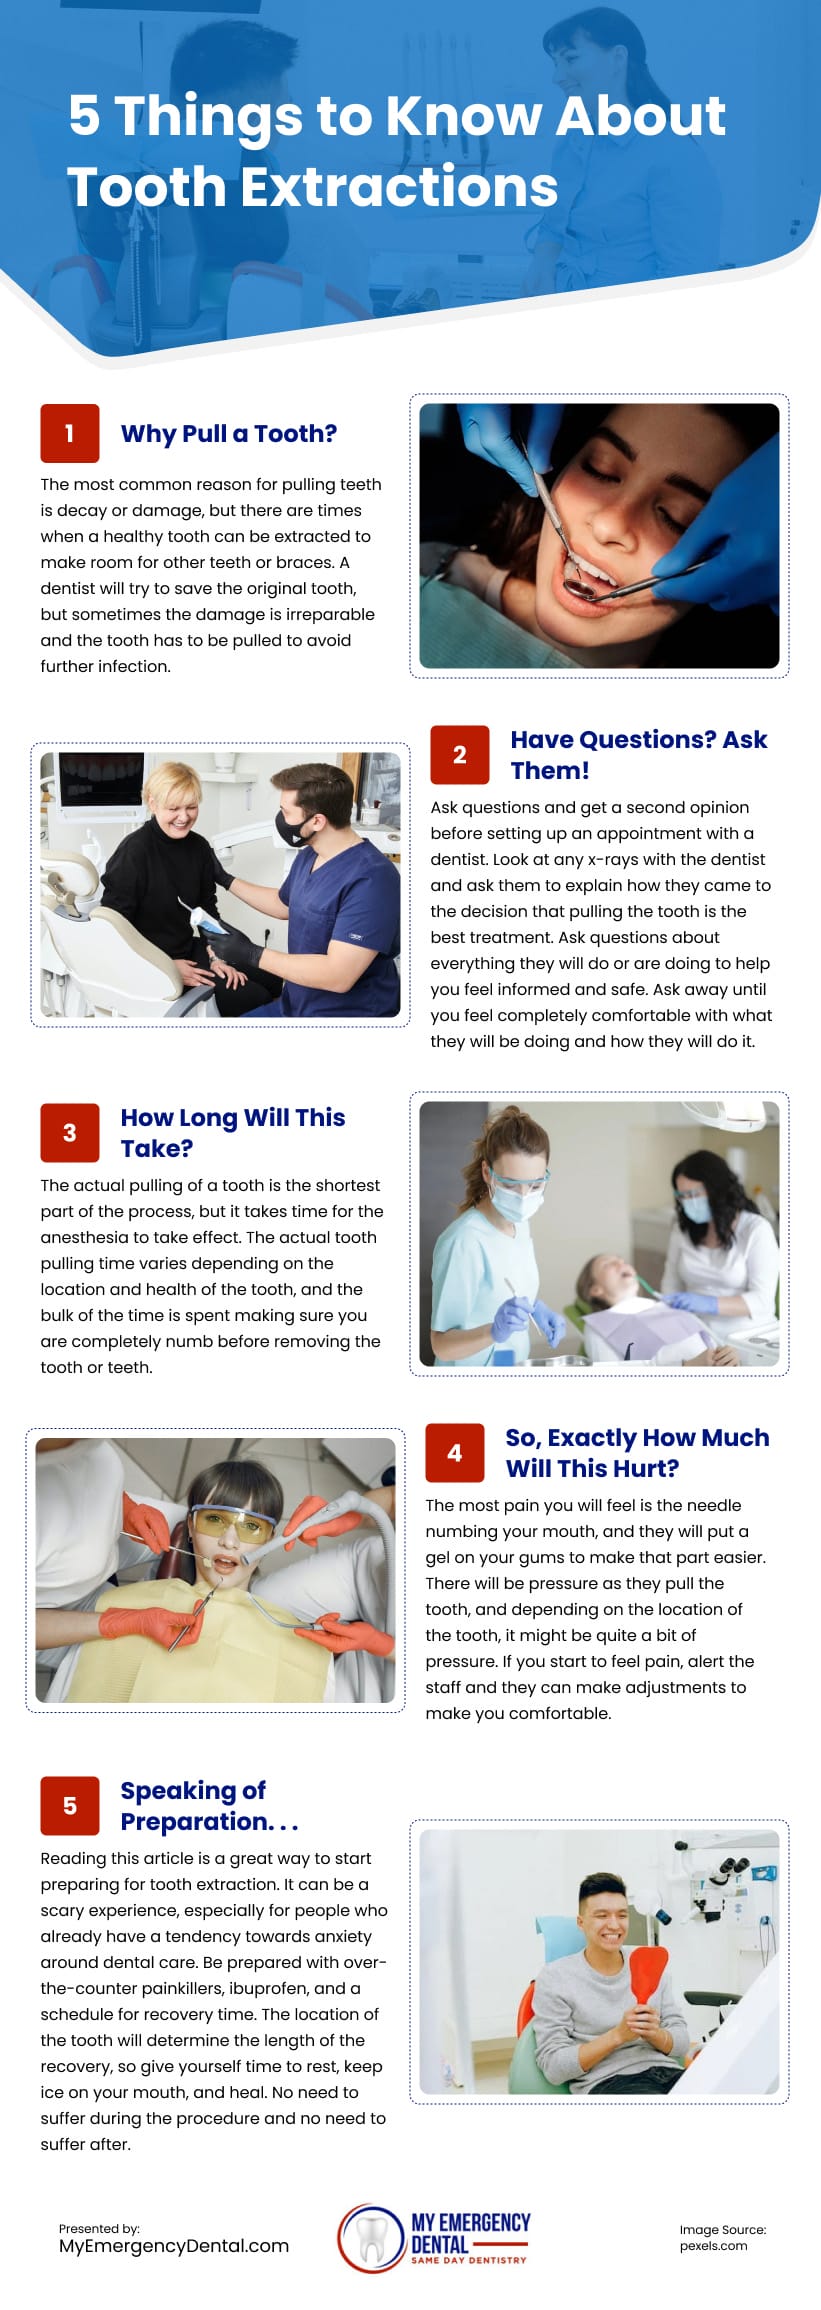 5 Things to Know About Tooth Extractions Infographic